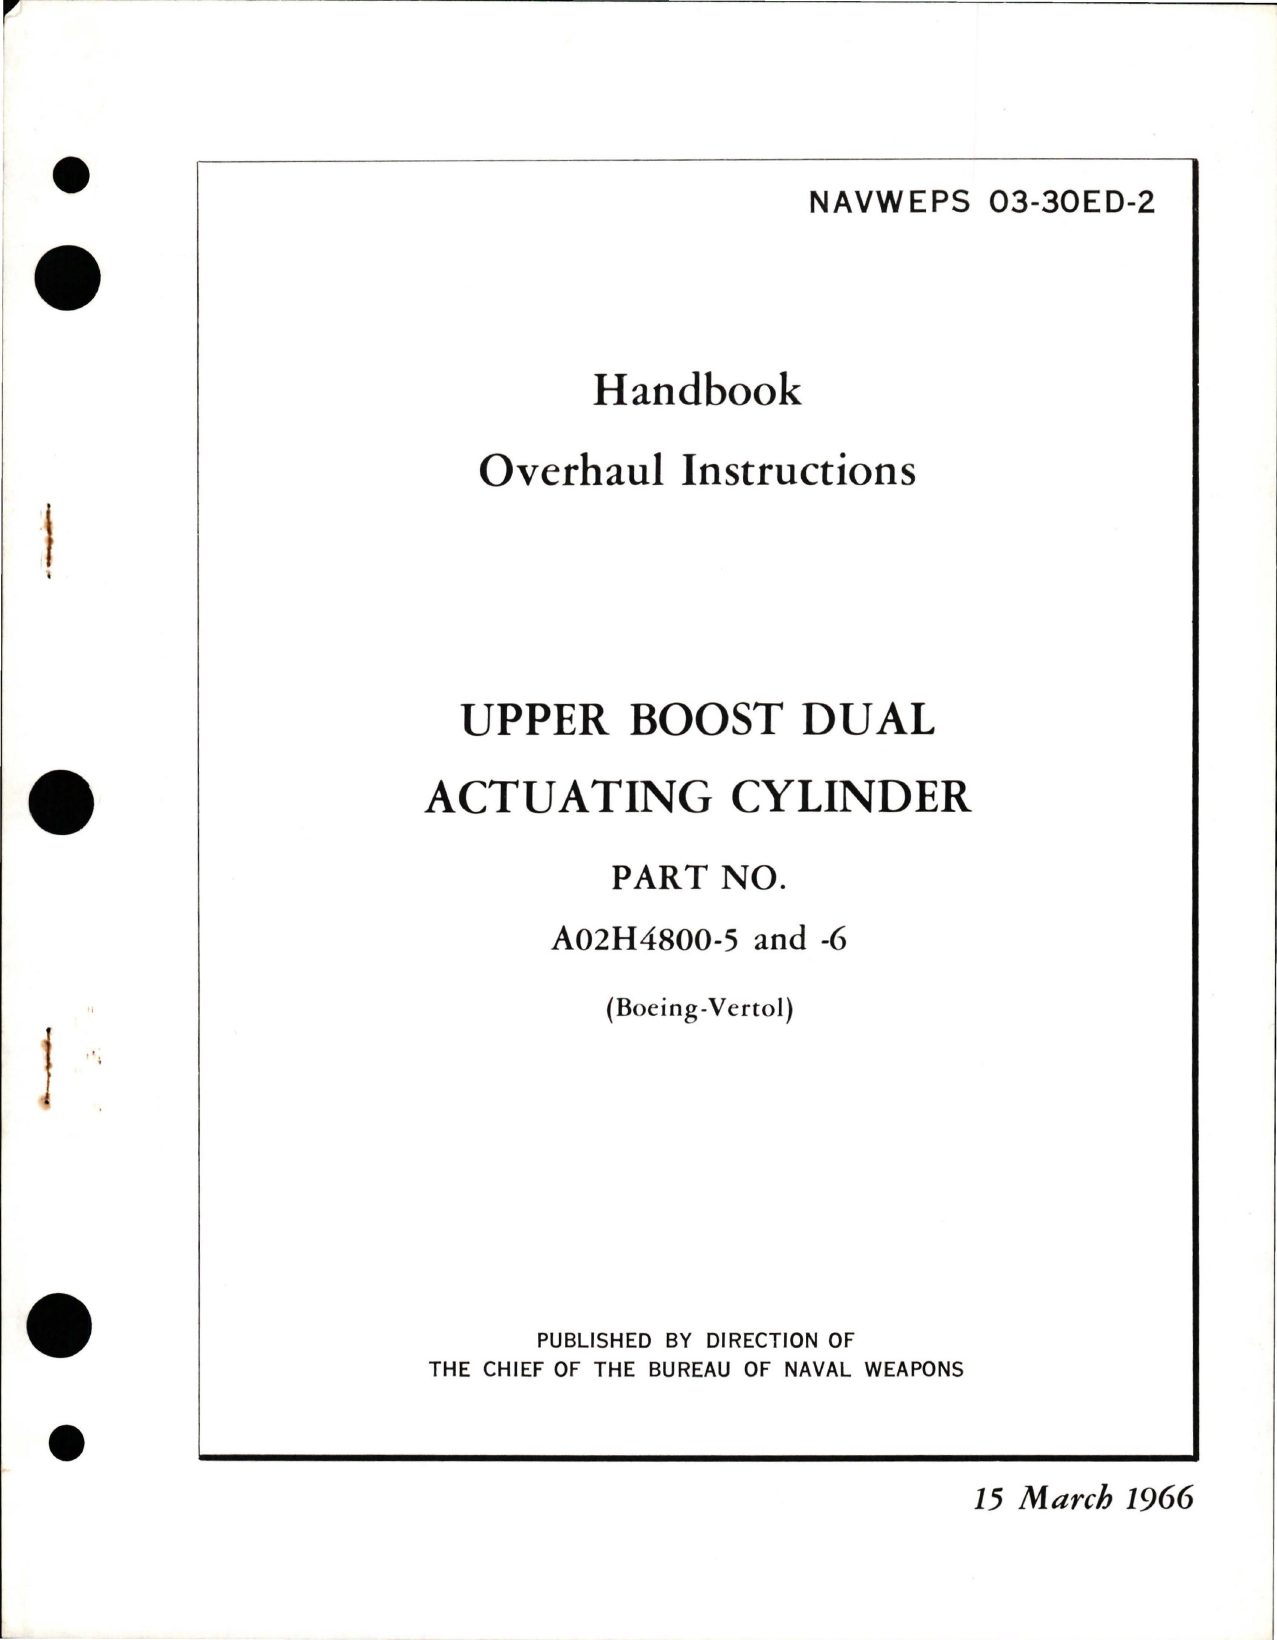 Sample page 1 from AirCorps Library document: Overhaul Instructions for Upper Boost Dual Actuating Cylinder - Part A02H4800-5 and A02H4800-6 